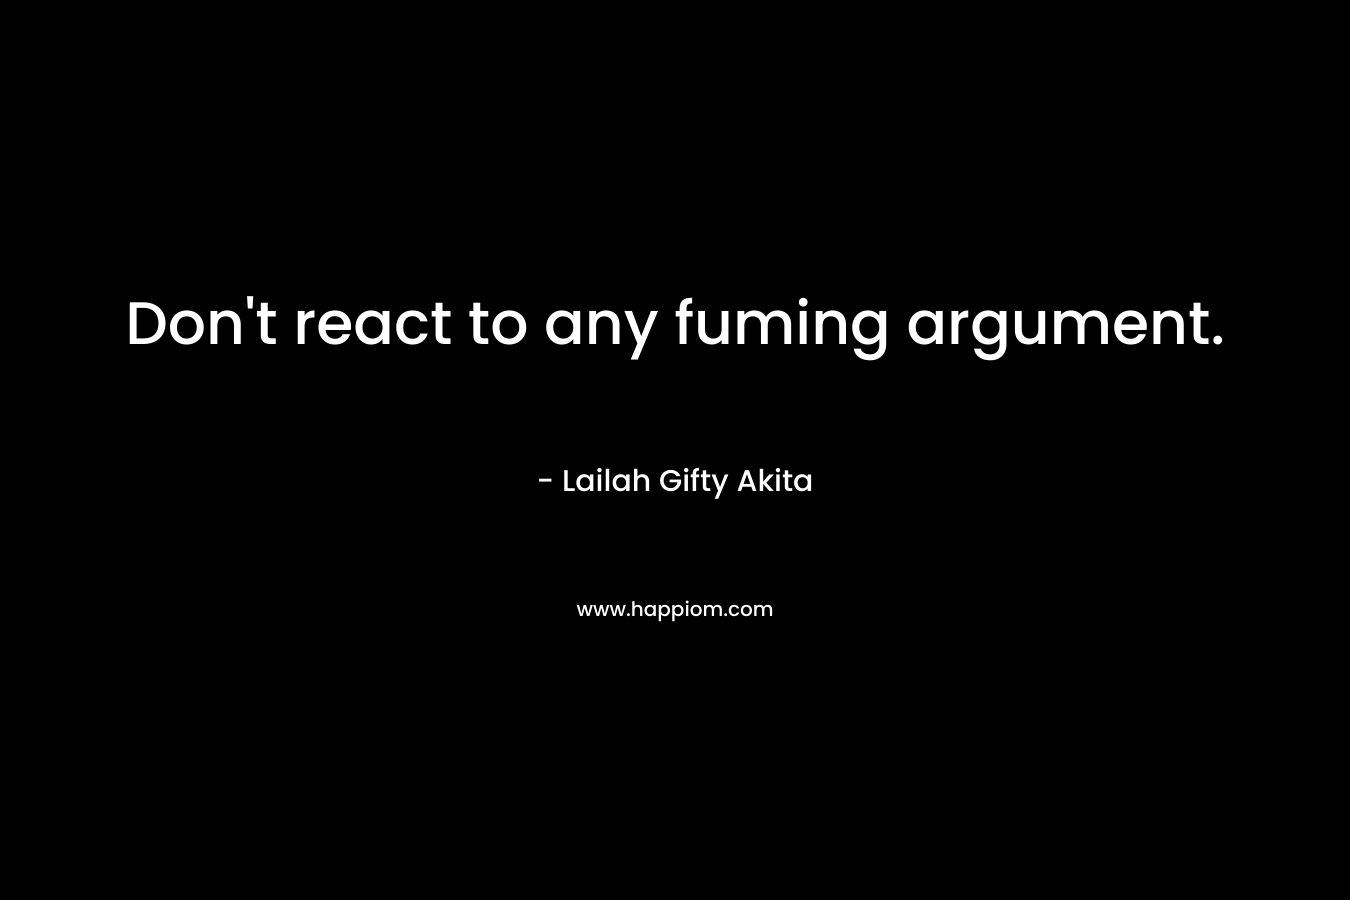 Don’t react to any fuming argument. – Lailah Gifty Akita